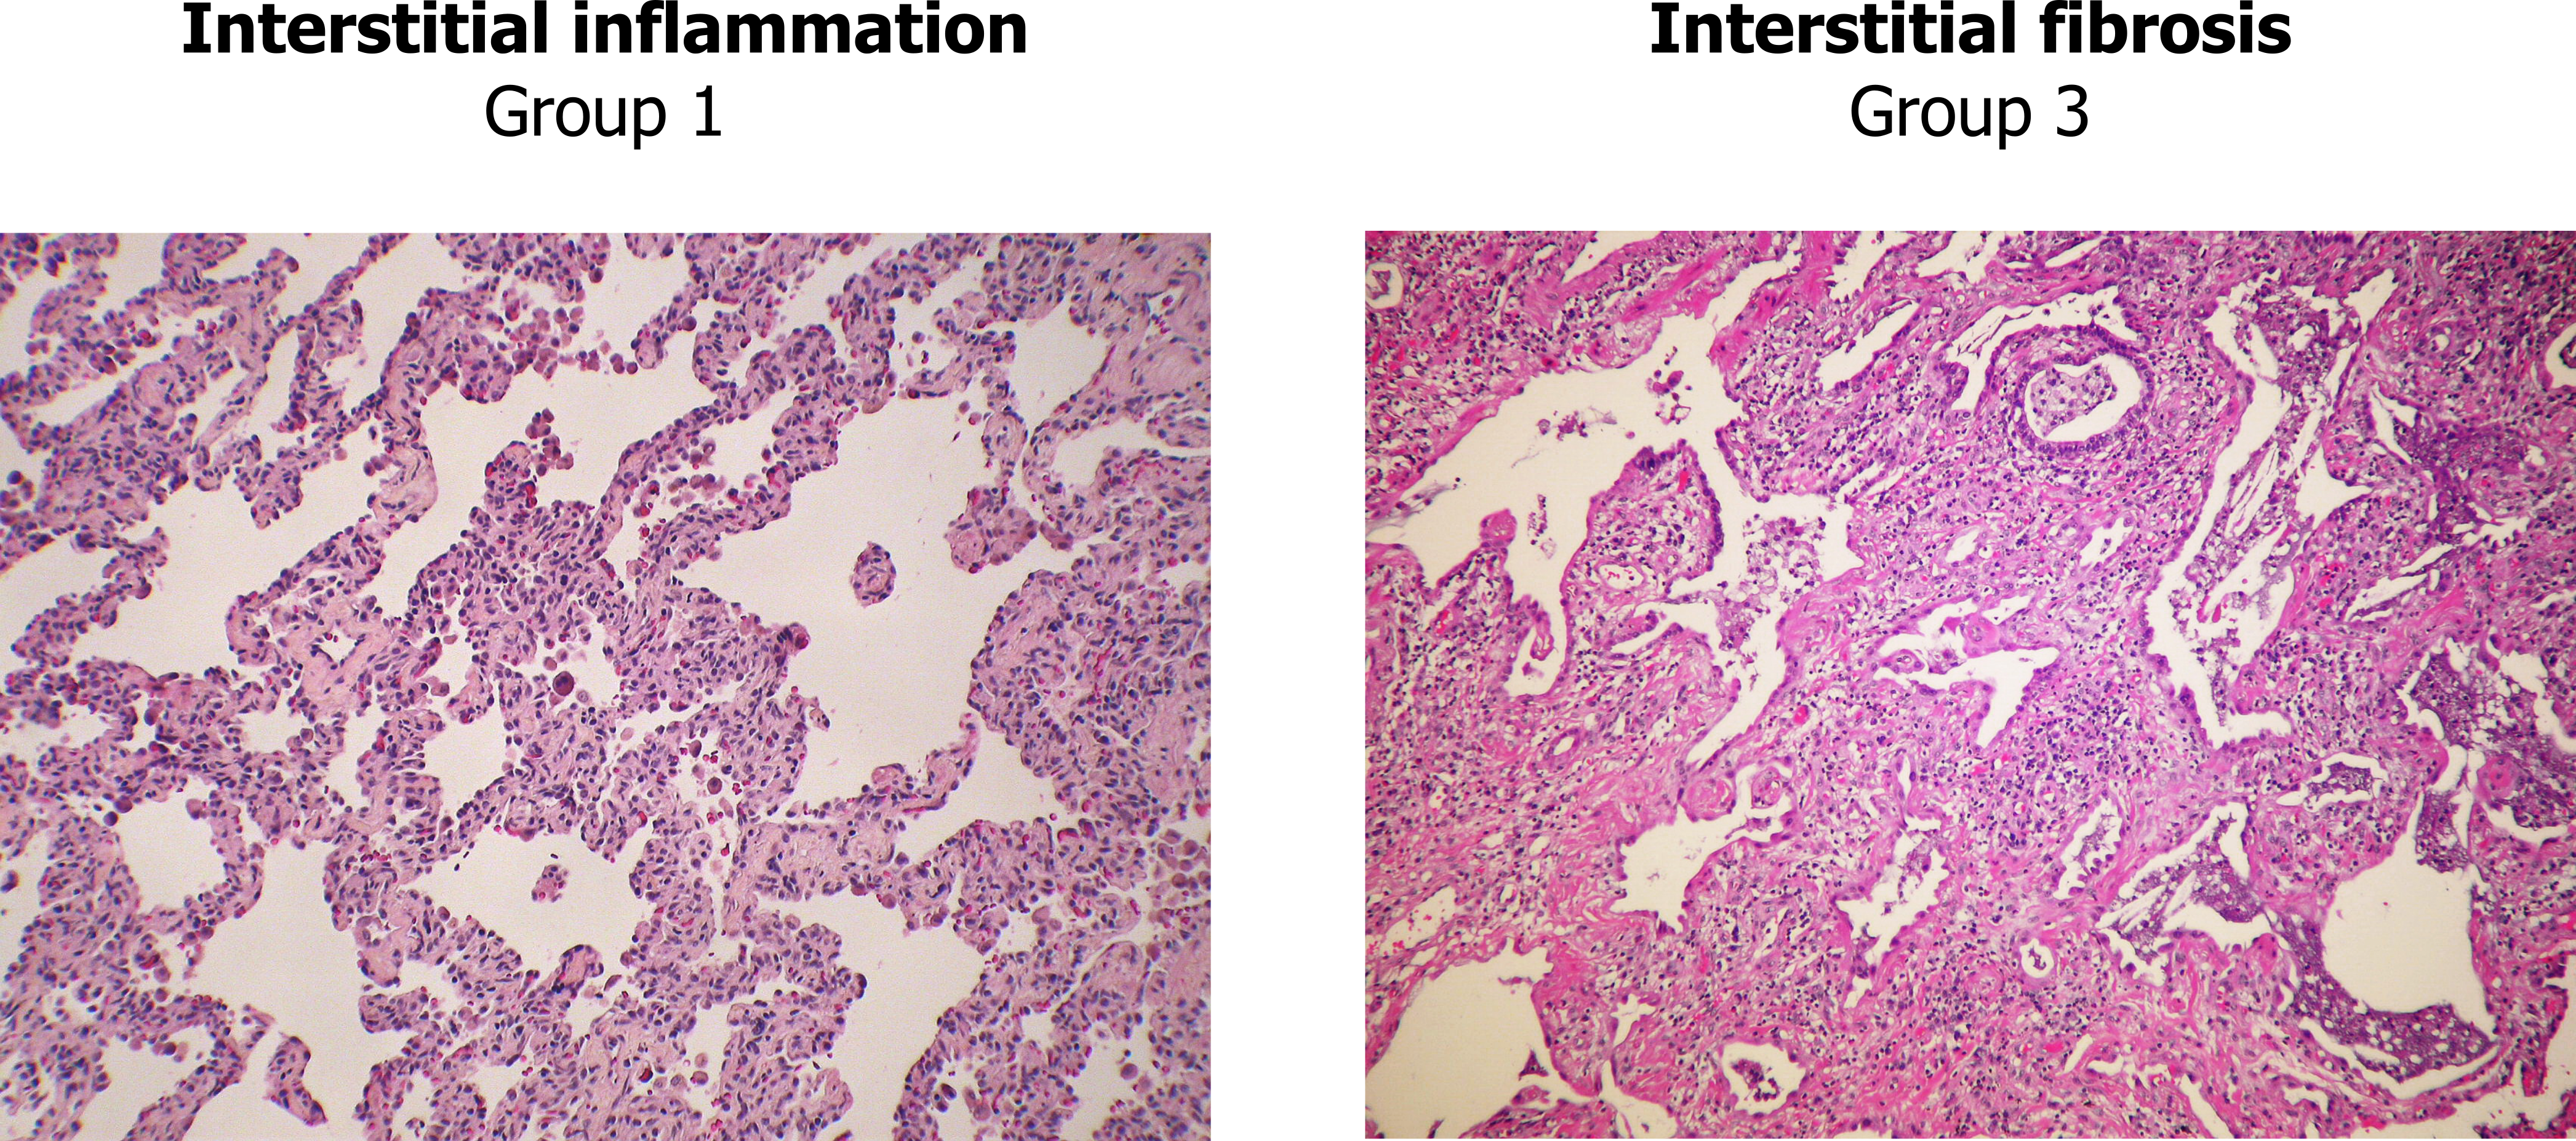 Two histological slides showing stages of nonspecific interstitial pneumonia. First slide shows thickened alveolar walls shown in inflammatory stage with infiltrate. Second slide shows fibrotic stage with increased thickness of alveolar walls and inclusion of fibrotic material.